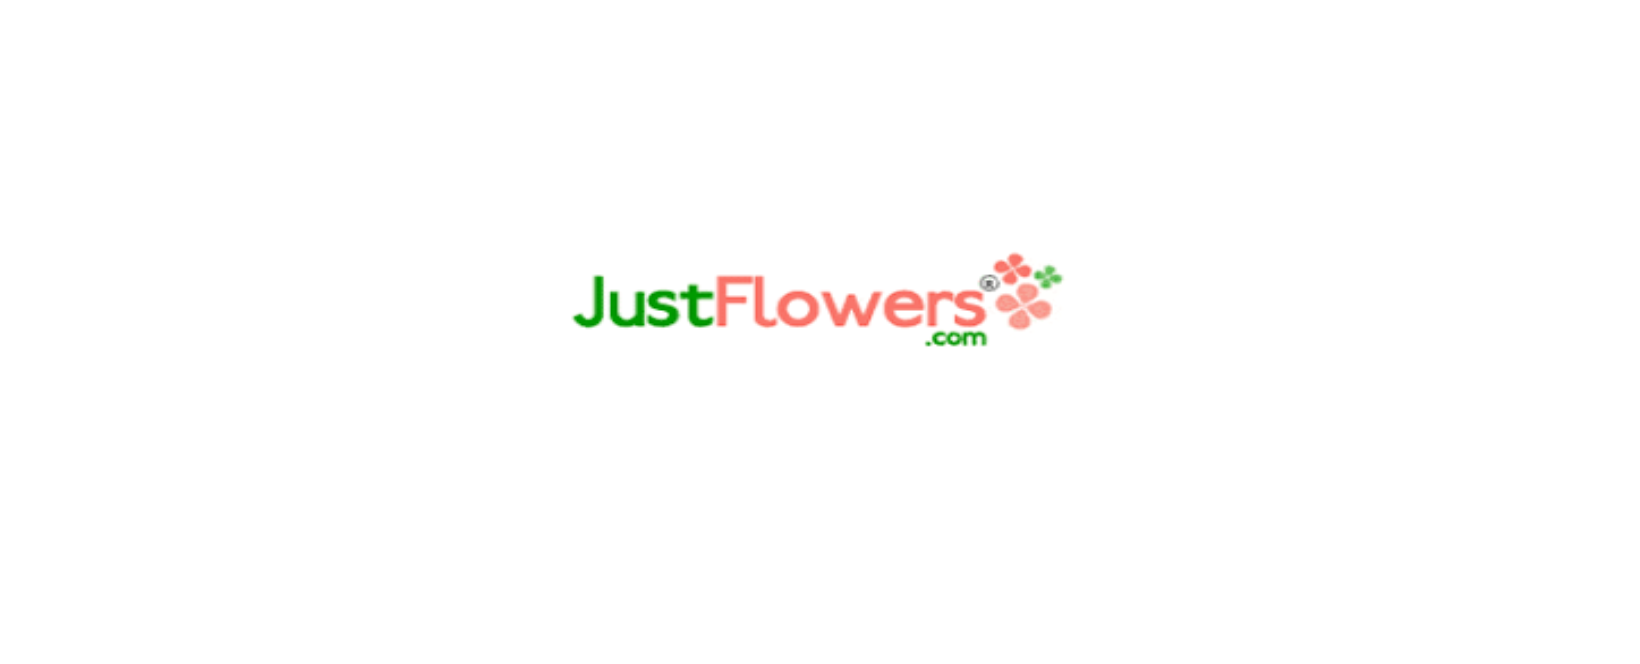 Just Flowers Discount Code 2022